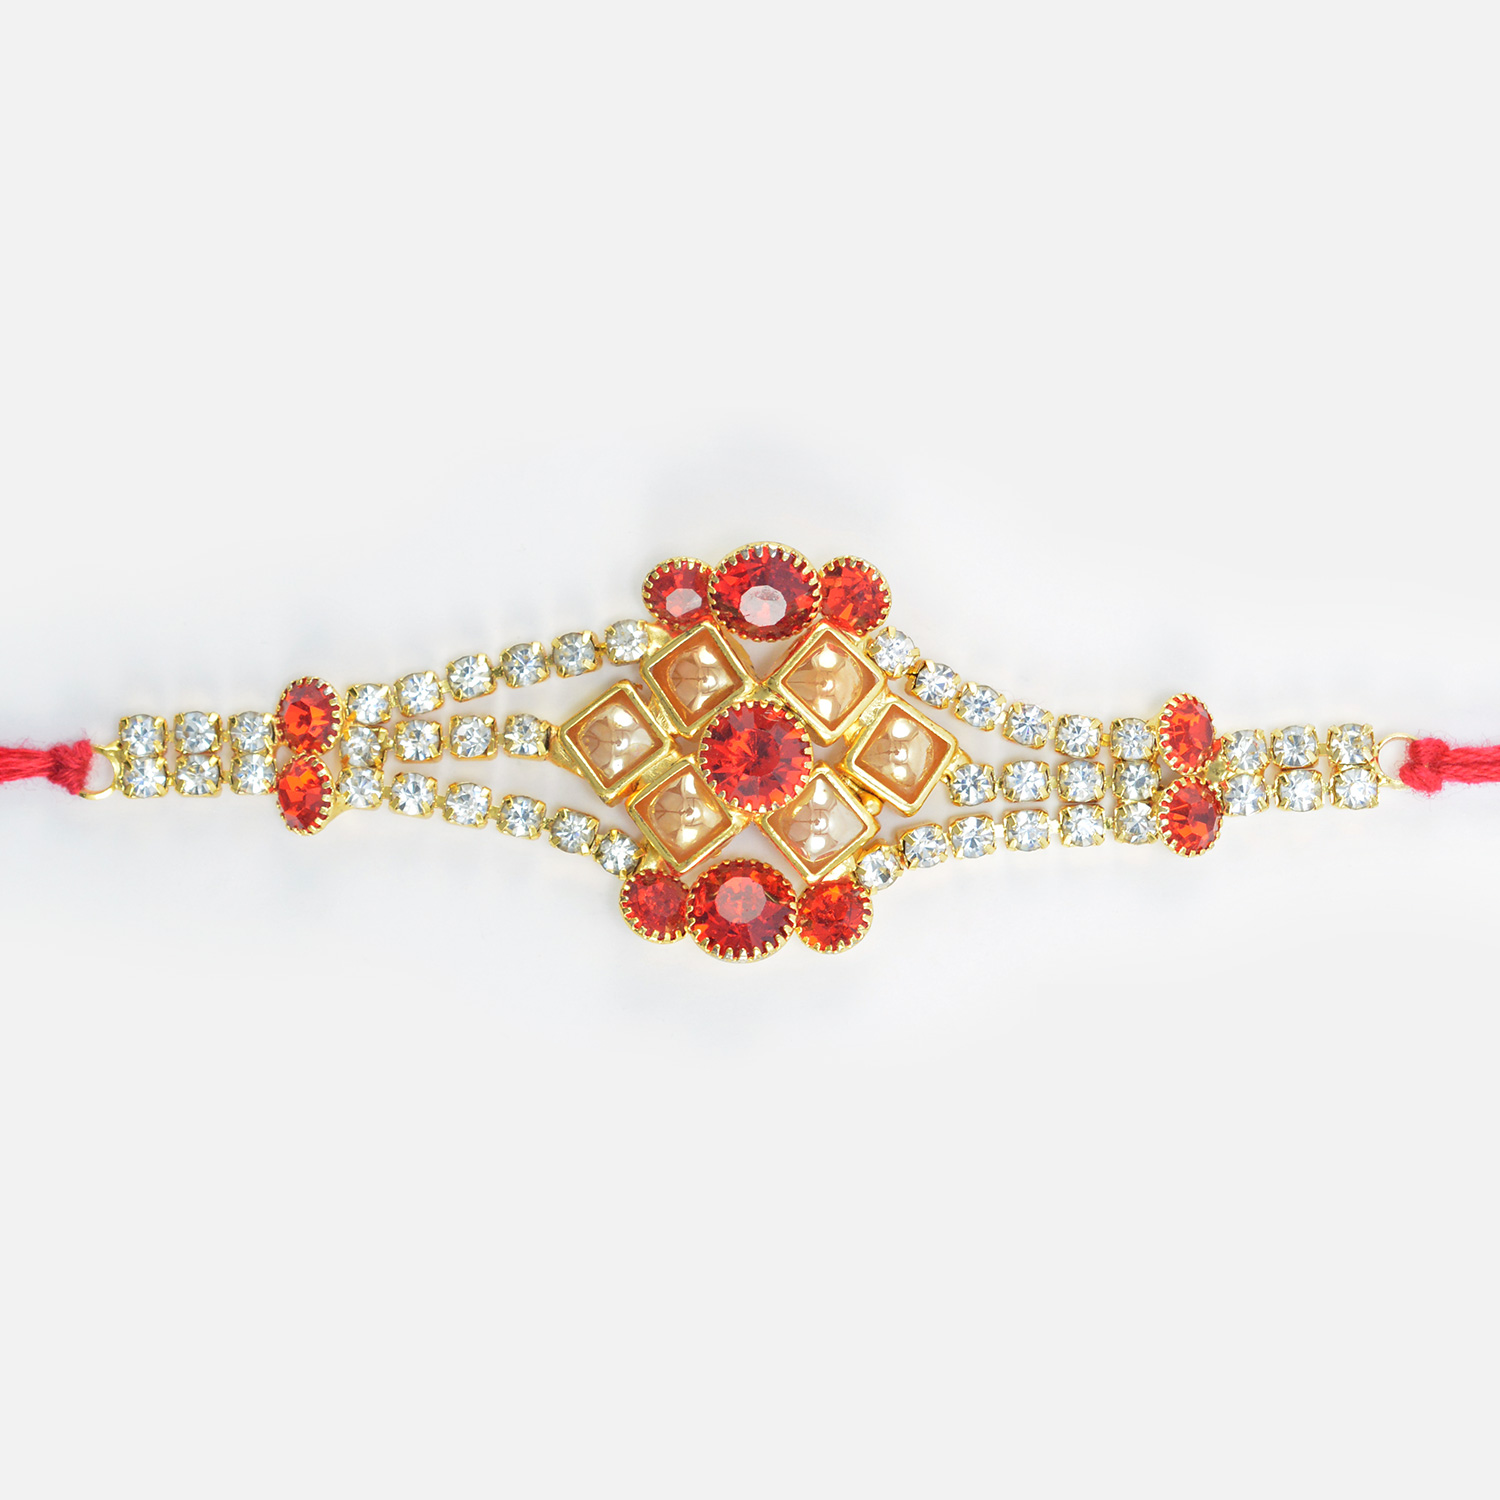 Jewel and Pearl Studded Marvelous Looking Amazing Rakhi for Brother